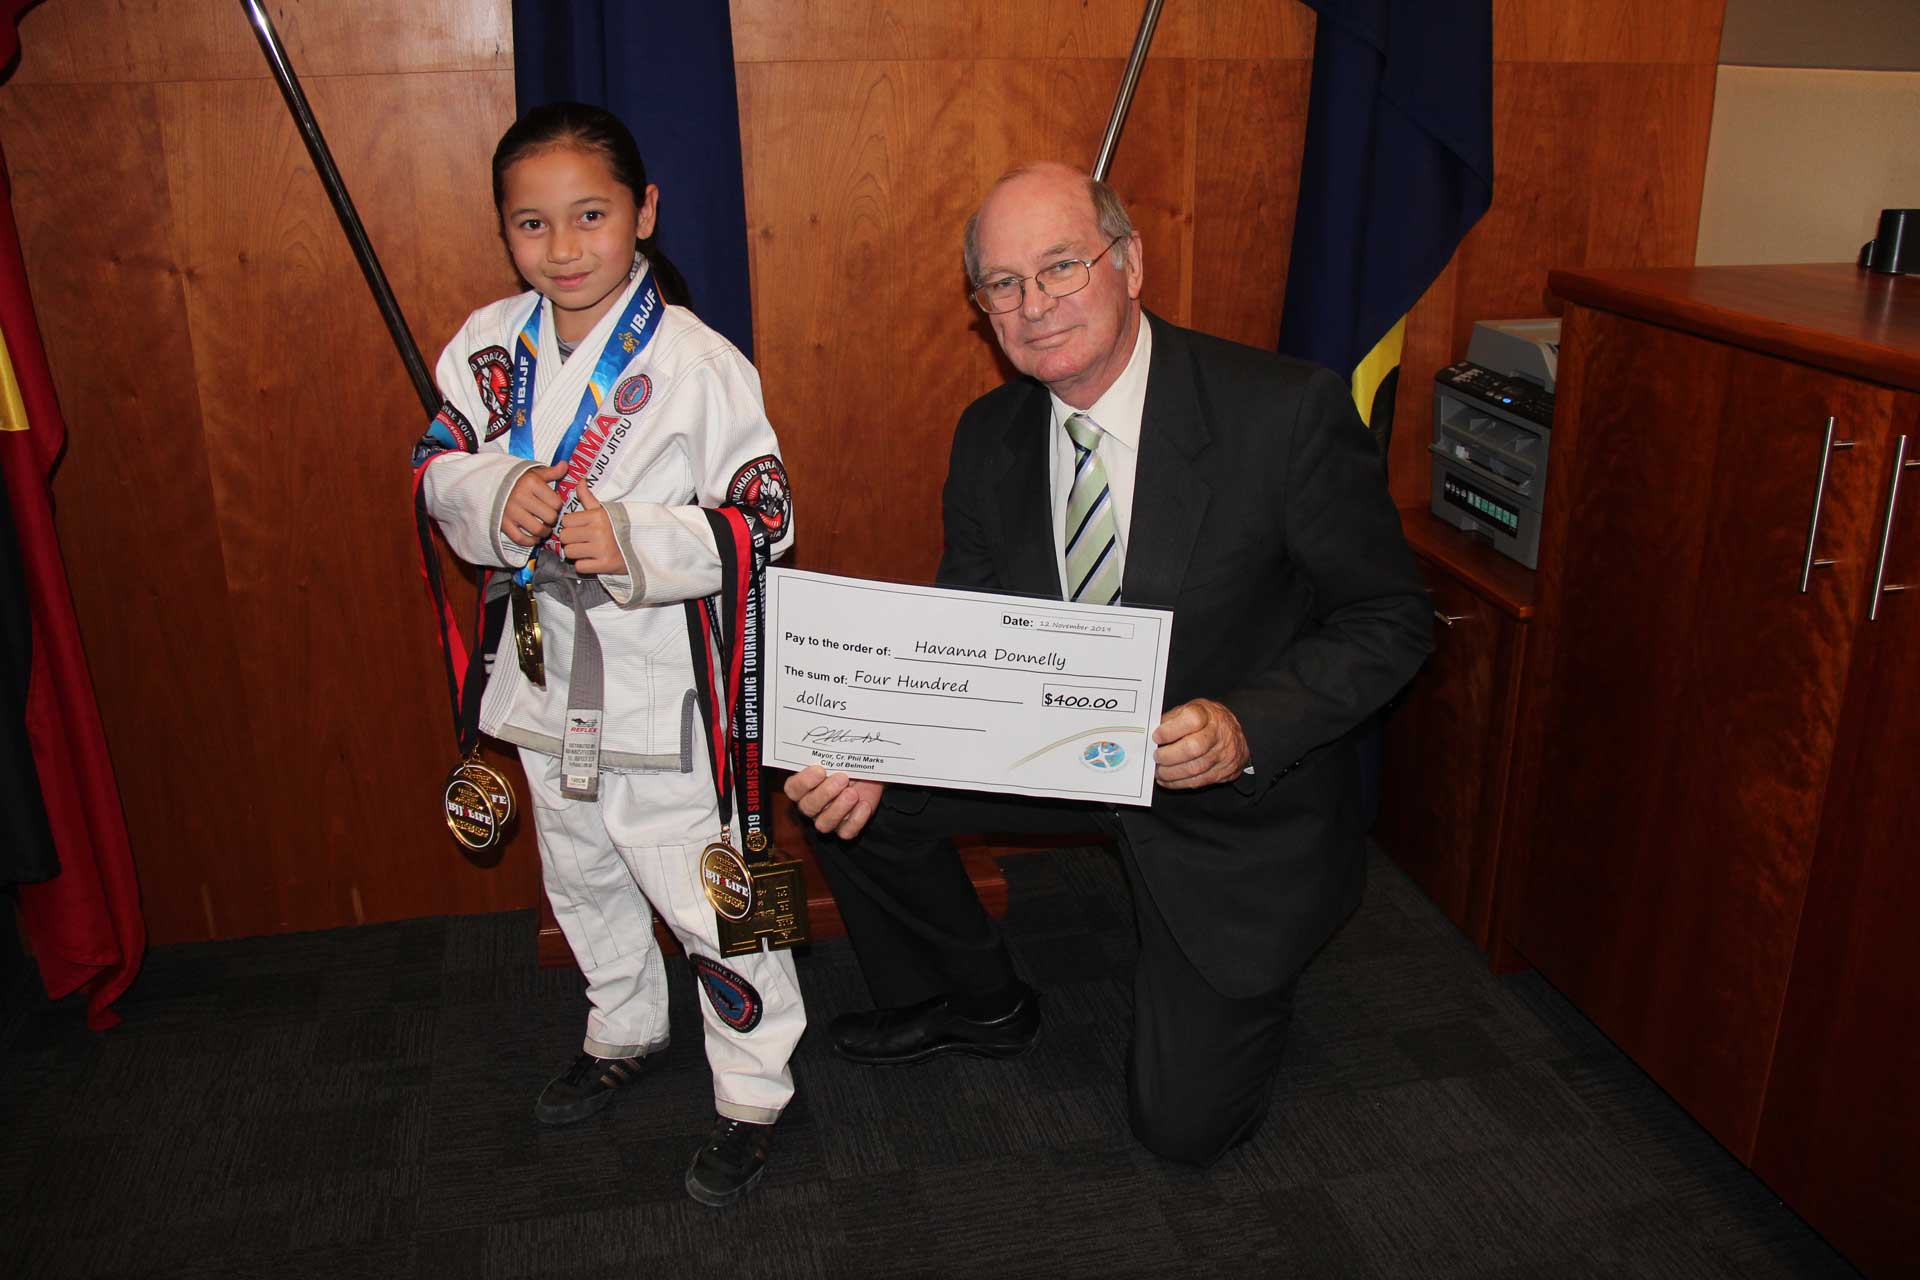 Mayor Councillor Phil Marks presents a sporting donation to a girl holding medals.